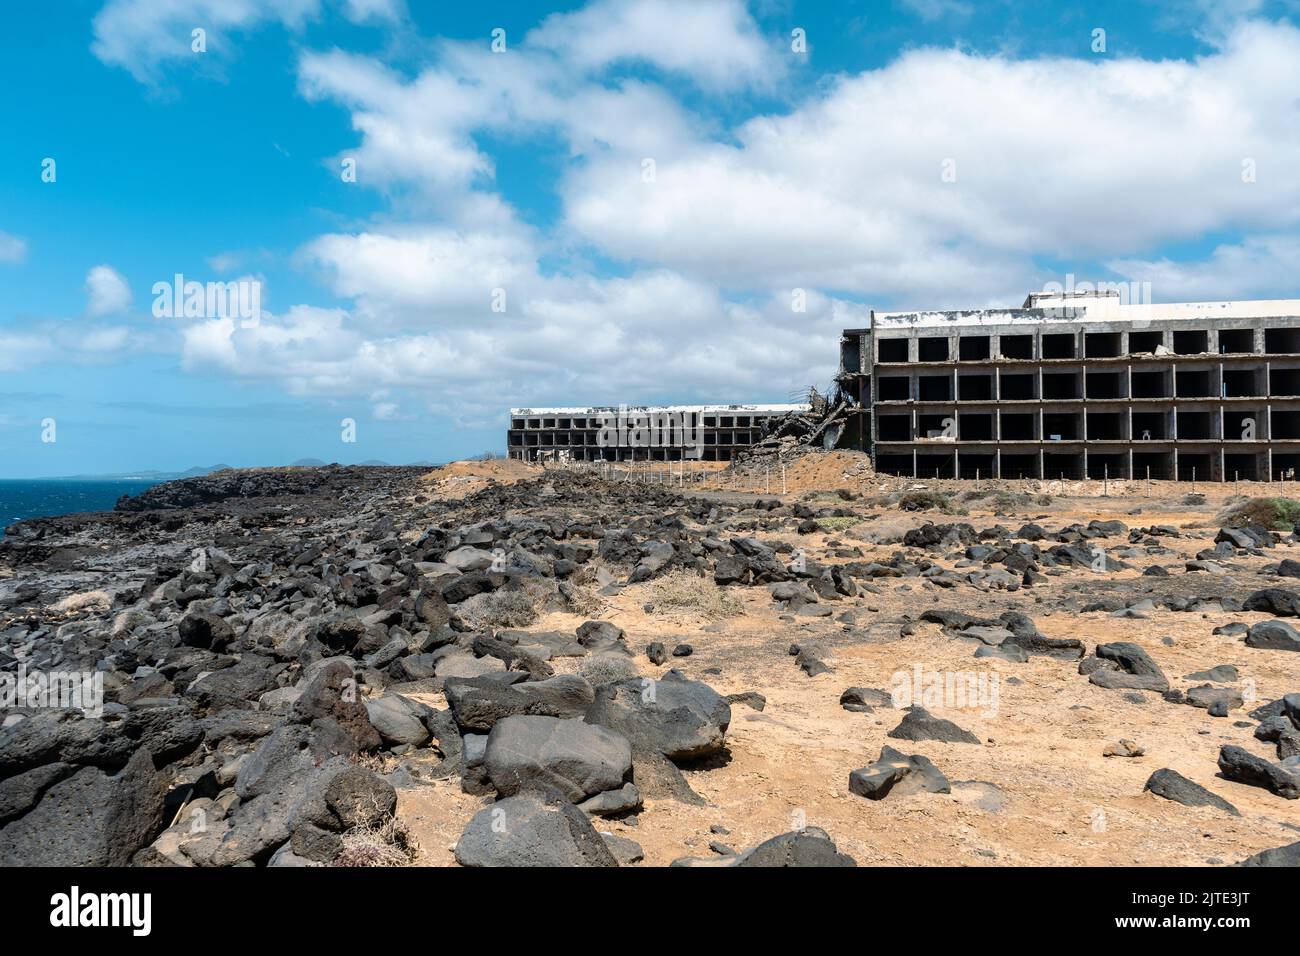 Abandoned ruined buildings in the south of Lanzarote, Canary Islands, Spain Stock Photo